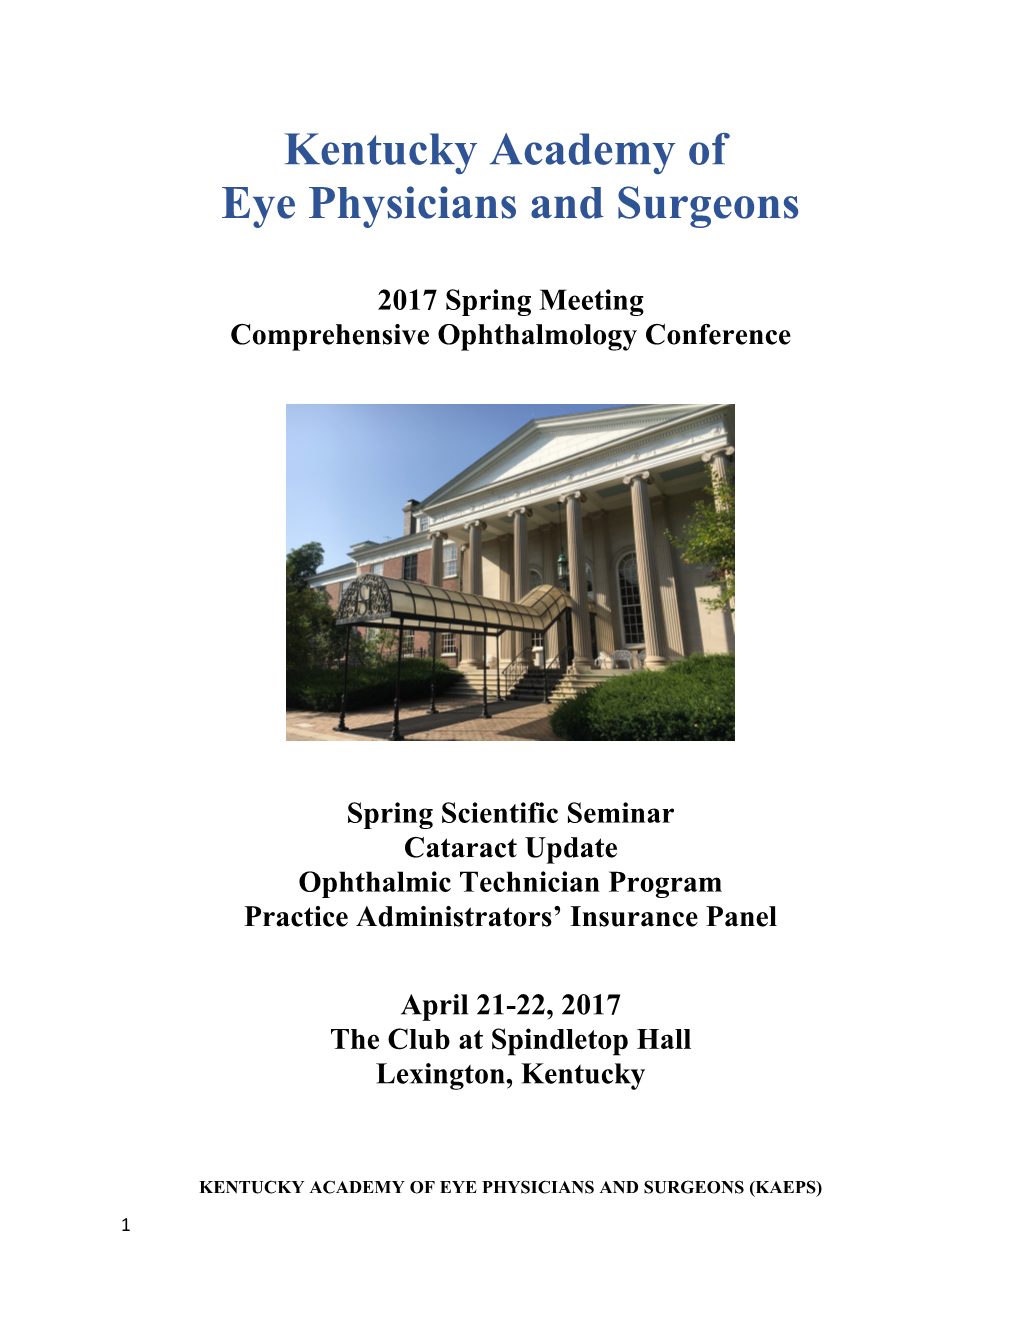 Eye Physicians and Surgeons